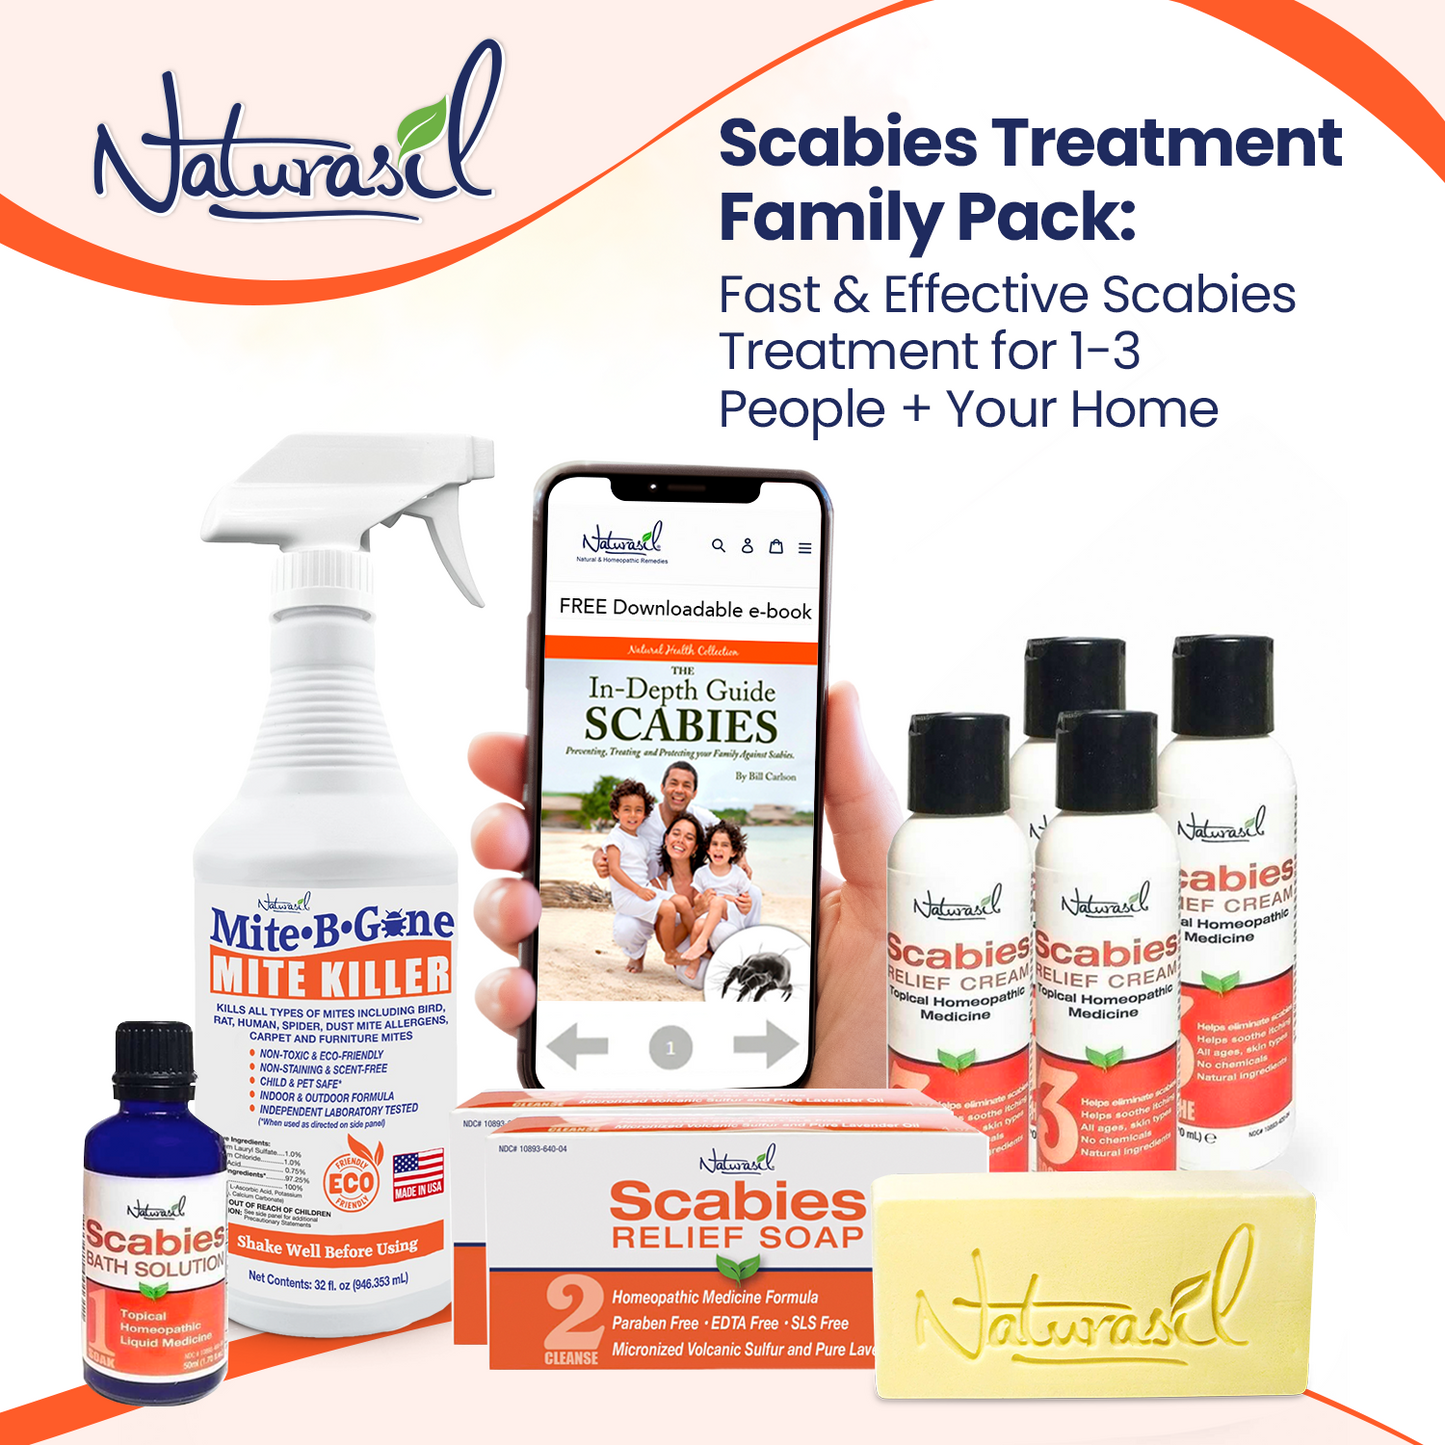 Scabies Treatment Family Pack (1-3 People)